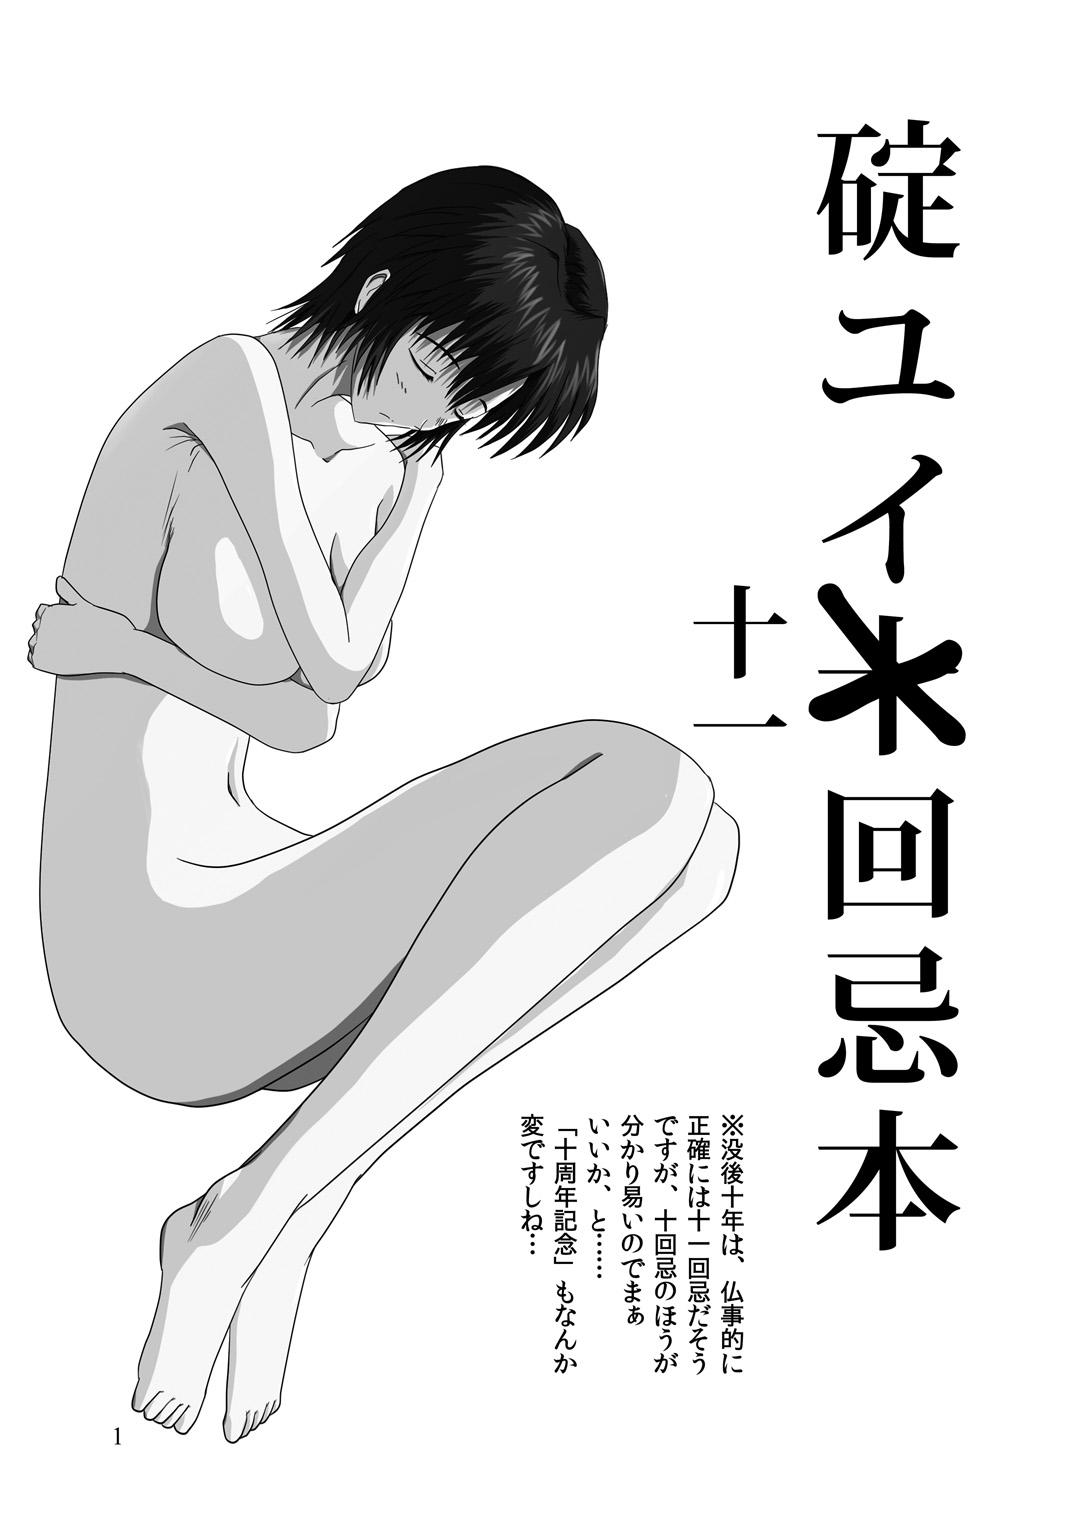 Best Blowjobs Yui Ikari 10th Anniversary Book - beyond the time - Neon genesis evangelion Point Of View - Page 2